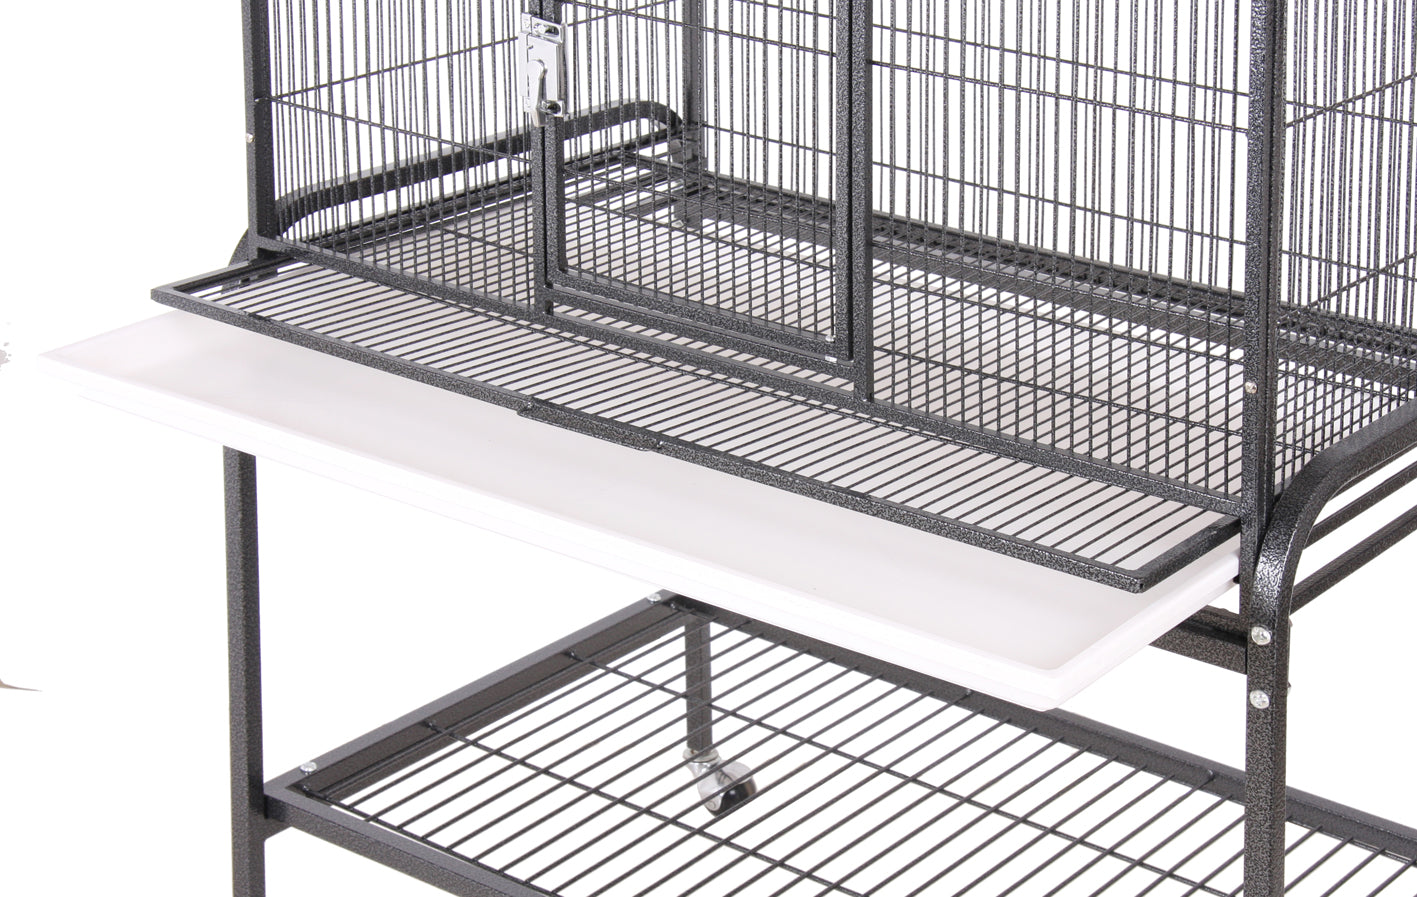 A&E Cage Co. 32"x21" Flight Cage & Stand with Double Front Door